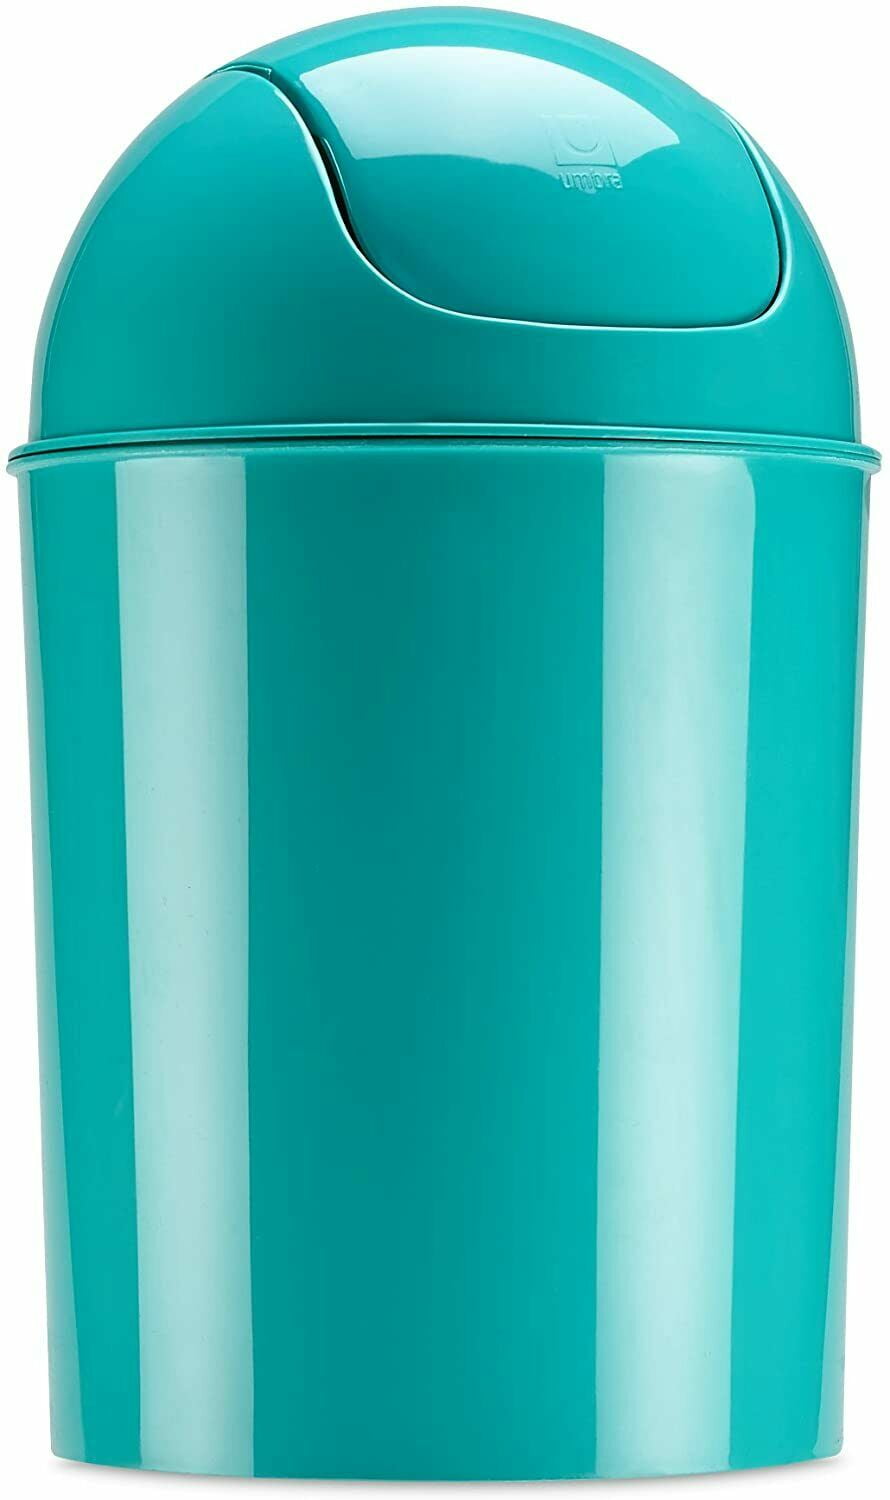 Umbra Mini Waste Can 1-1/2 Gallon with Swing Lid 